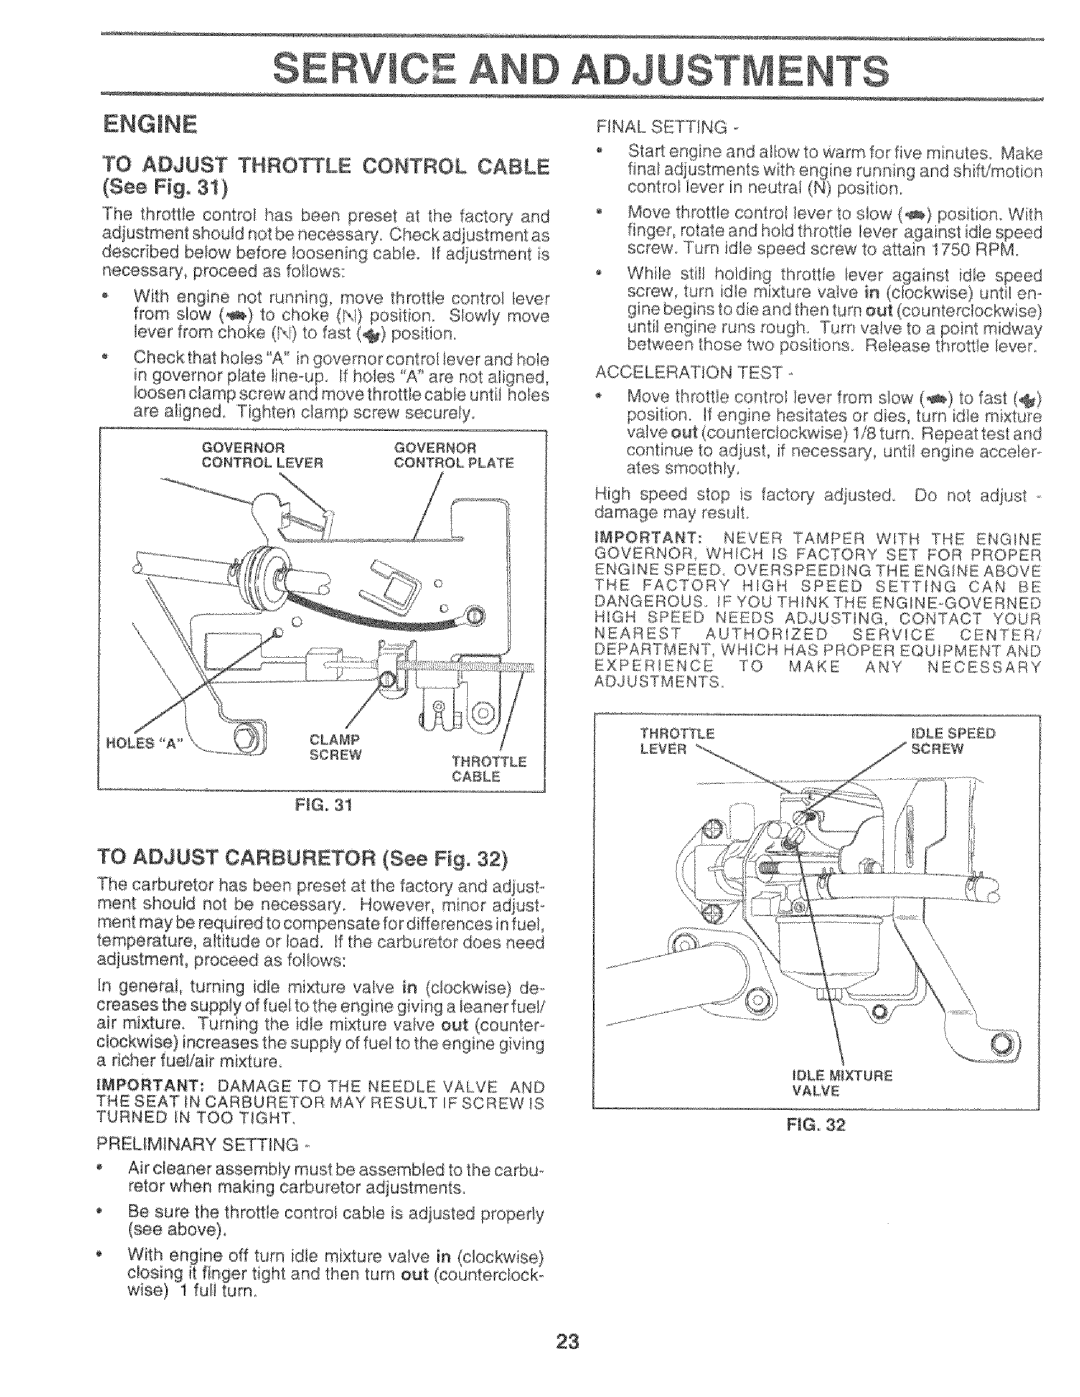 Sears 917.25759 manual TO ADJUST THRO_LE CONTROL CABLE See Fig, TO ADJUST CARBURETOR See Fig 